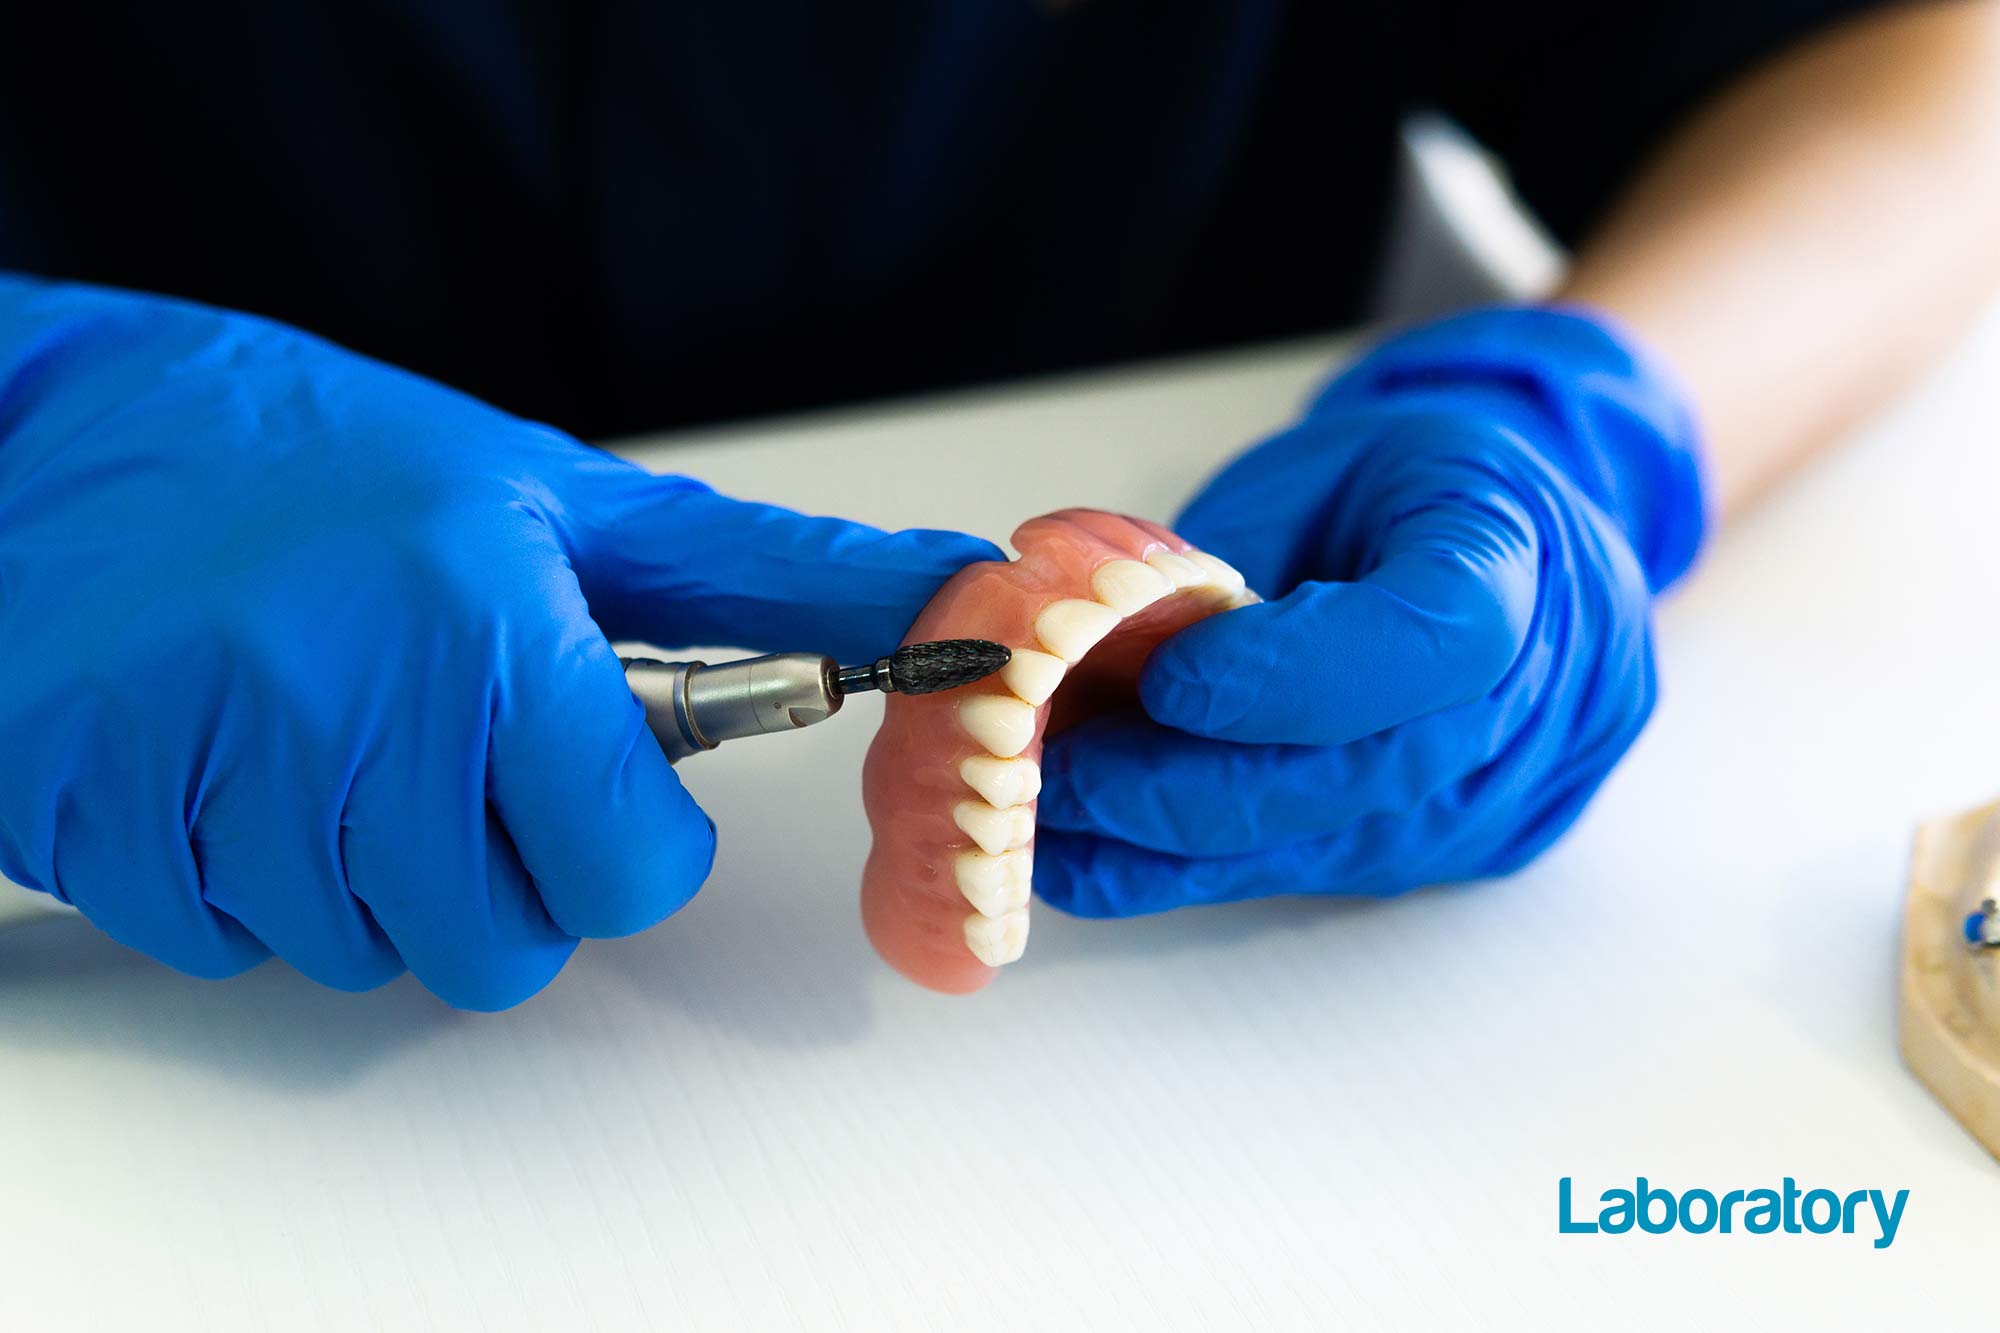 Dentistry.co.uk and Laboratory ask where the professions’s regulators stand on the illegal dental manufacture or import of dental devices such as dentures and crowns.